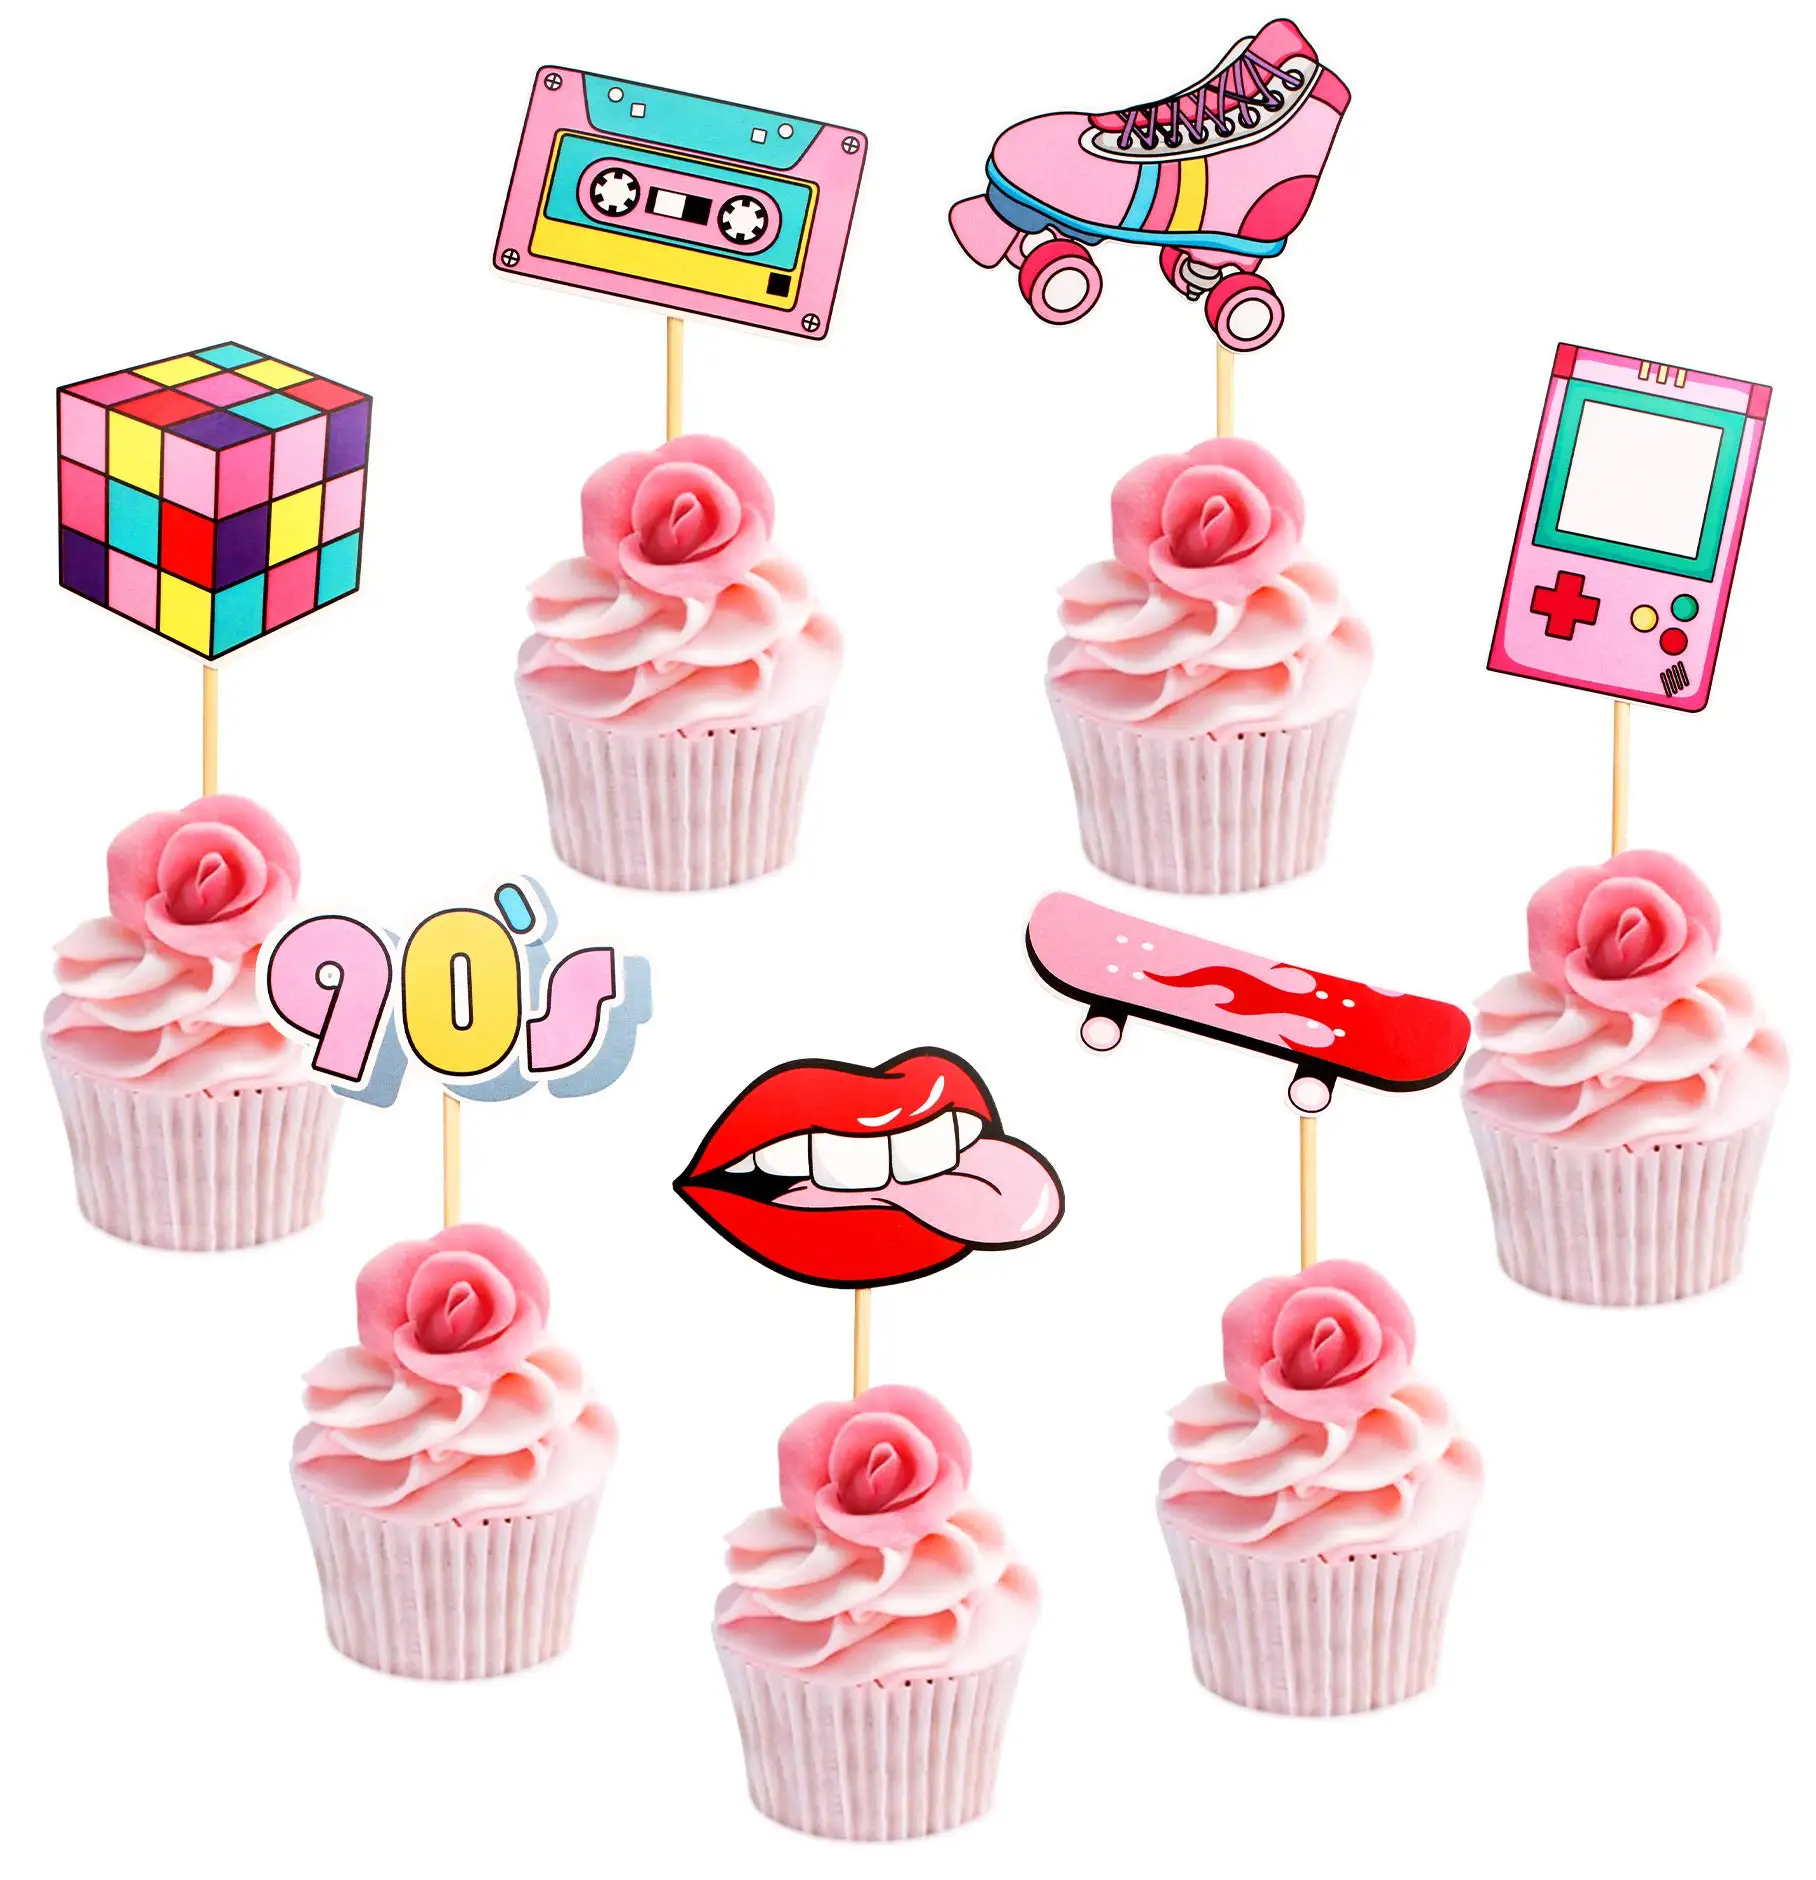 21Pcs 80s 90s Themed Cupcake Toppers Dessert Cupcake Toppers Birthday Supplies Throwback Party Favors Decorations kids birthday party decorations latex balloons happy birthday banner cupcake toppers paper fans honeycomb ball party supplies